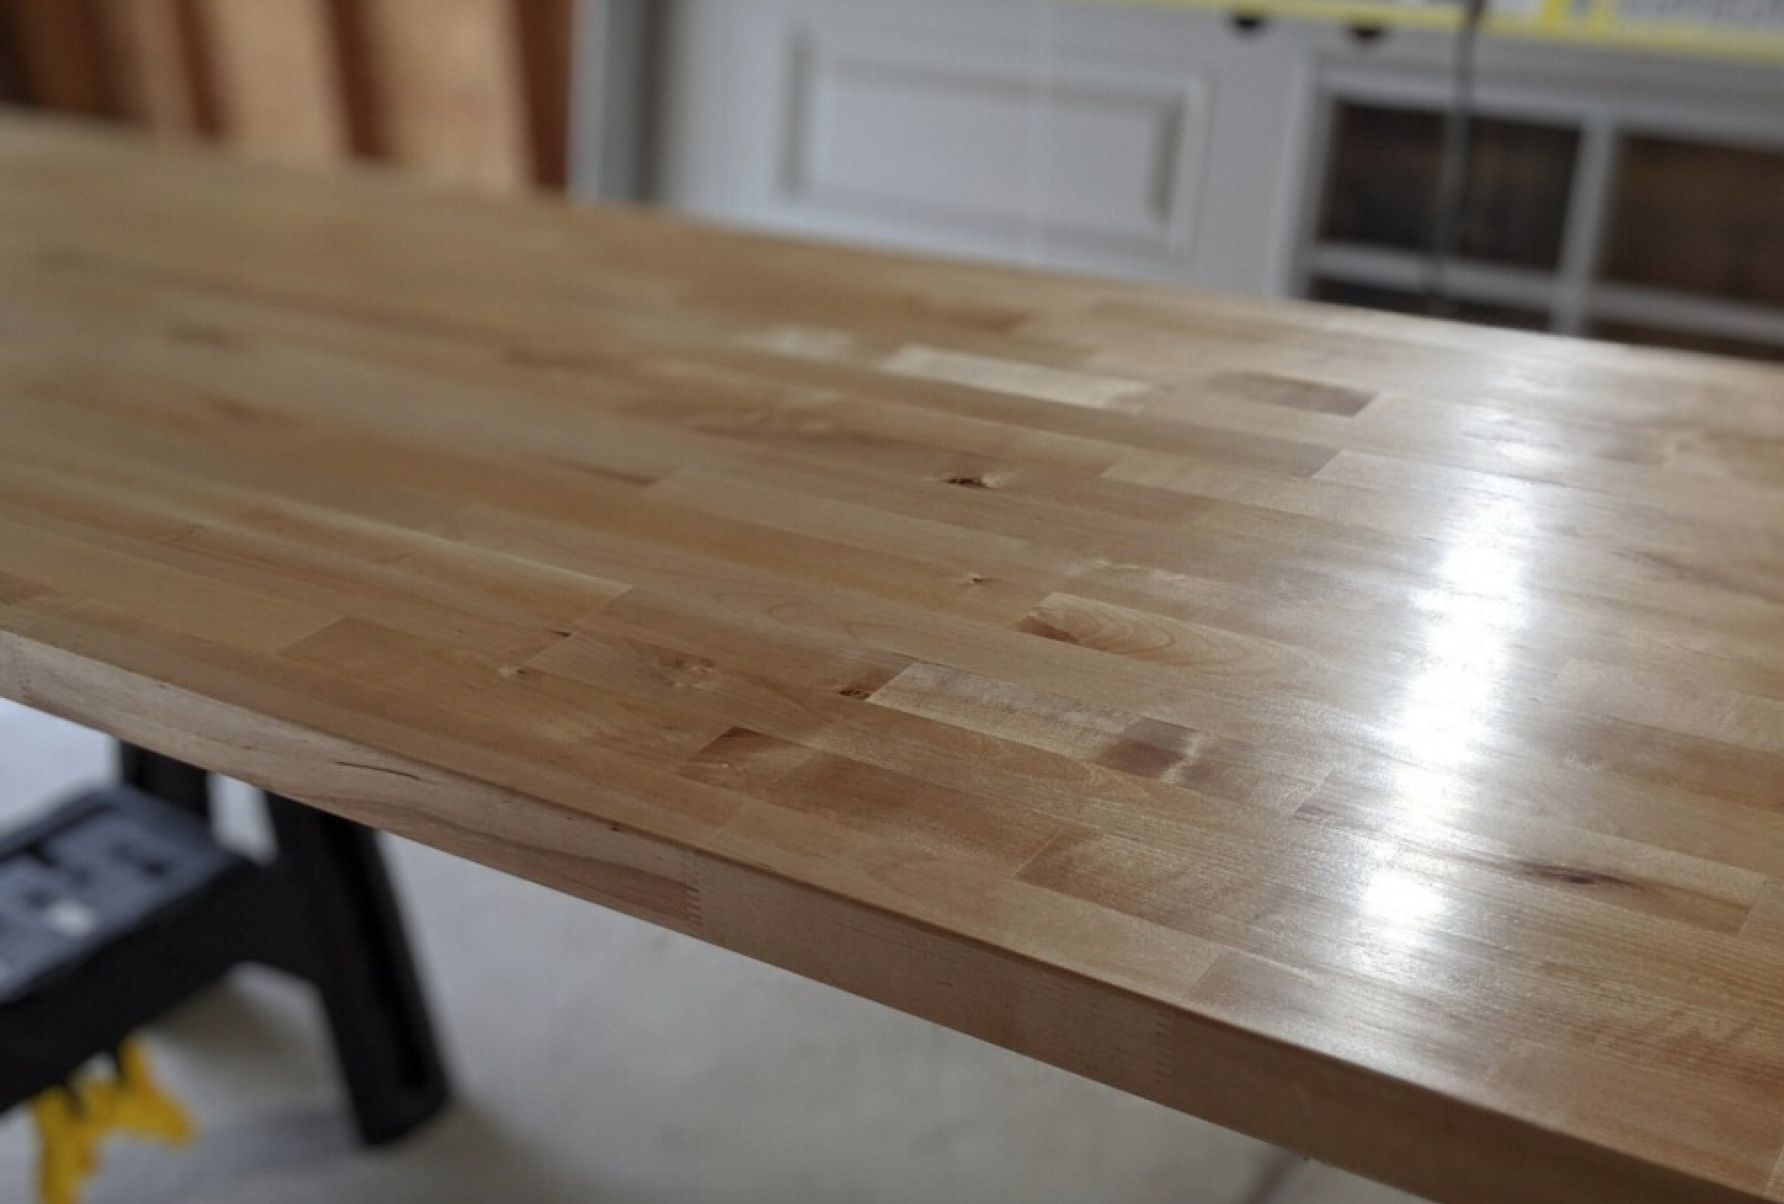 Desk top out of butcher block